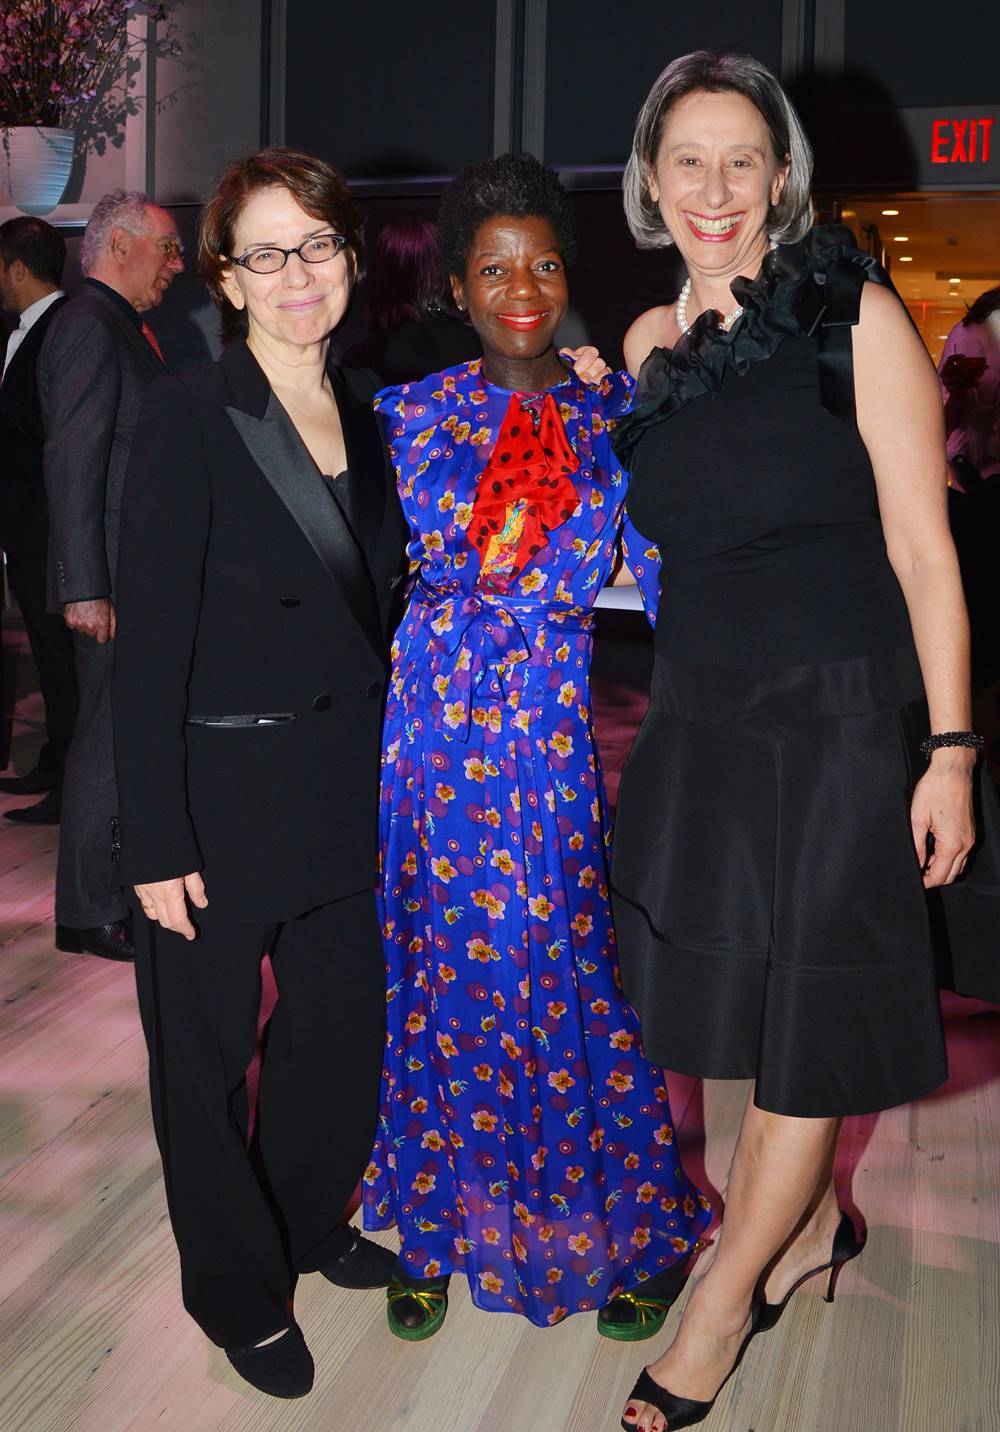 Elisabeth Sussman, Thelma Golden, Connie Wolf at Inaugural Whitney Collection Award on April 5, 2016.Photo: Courtesy of Patrick McMullan/PMC. ©Patrick McMullan.